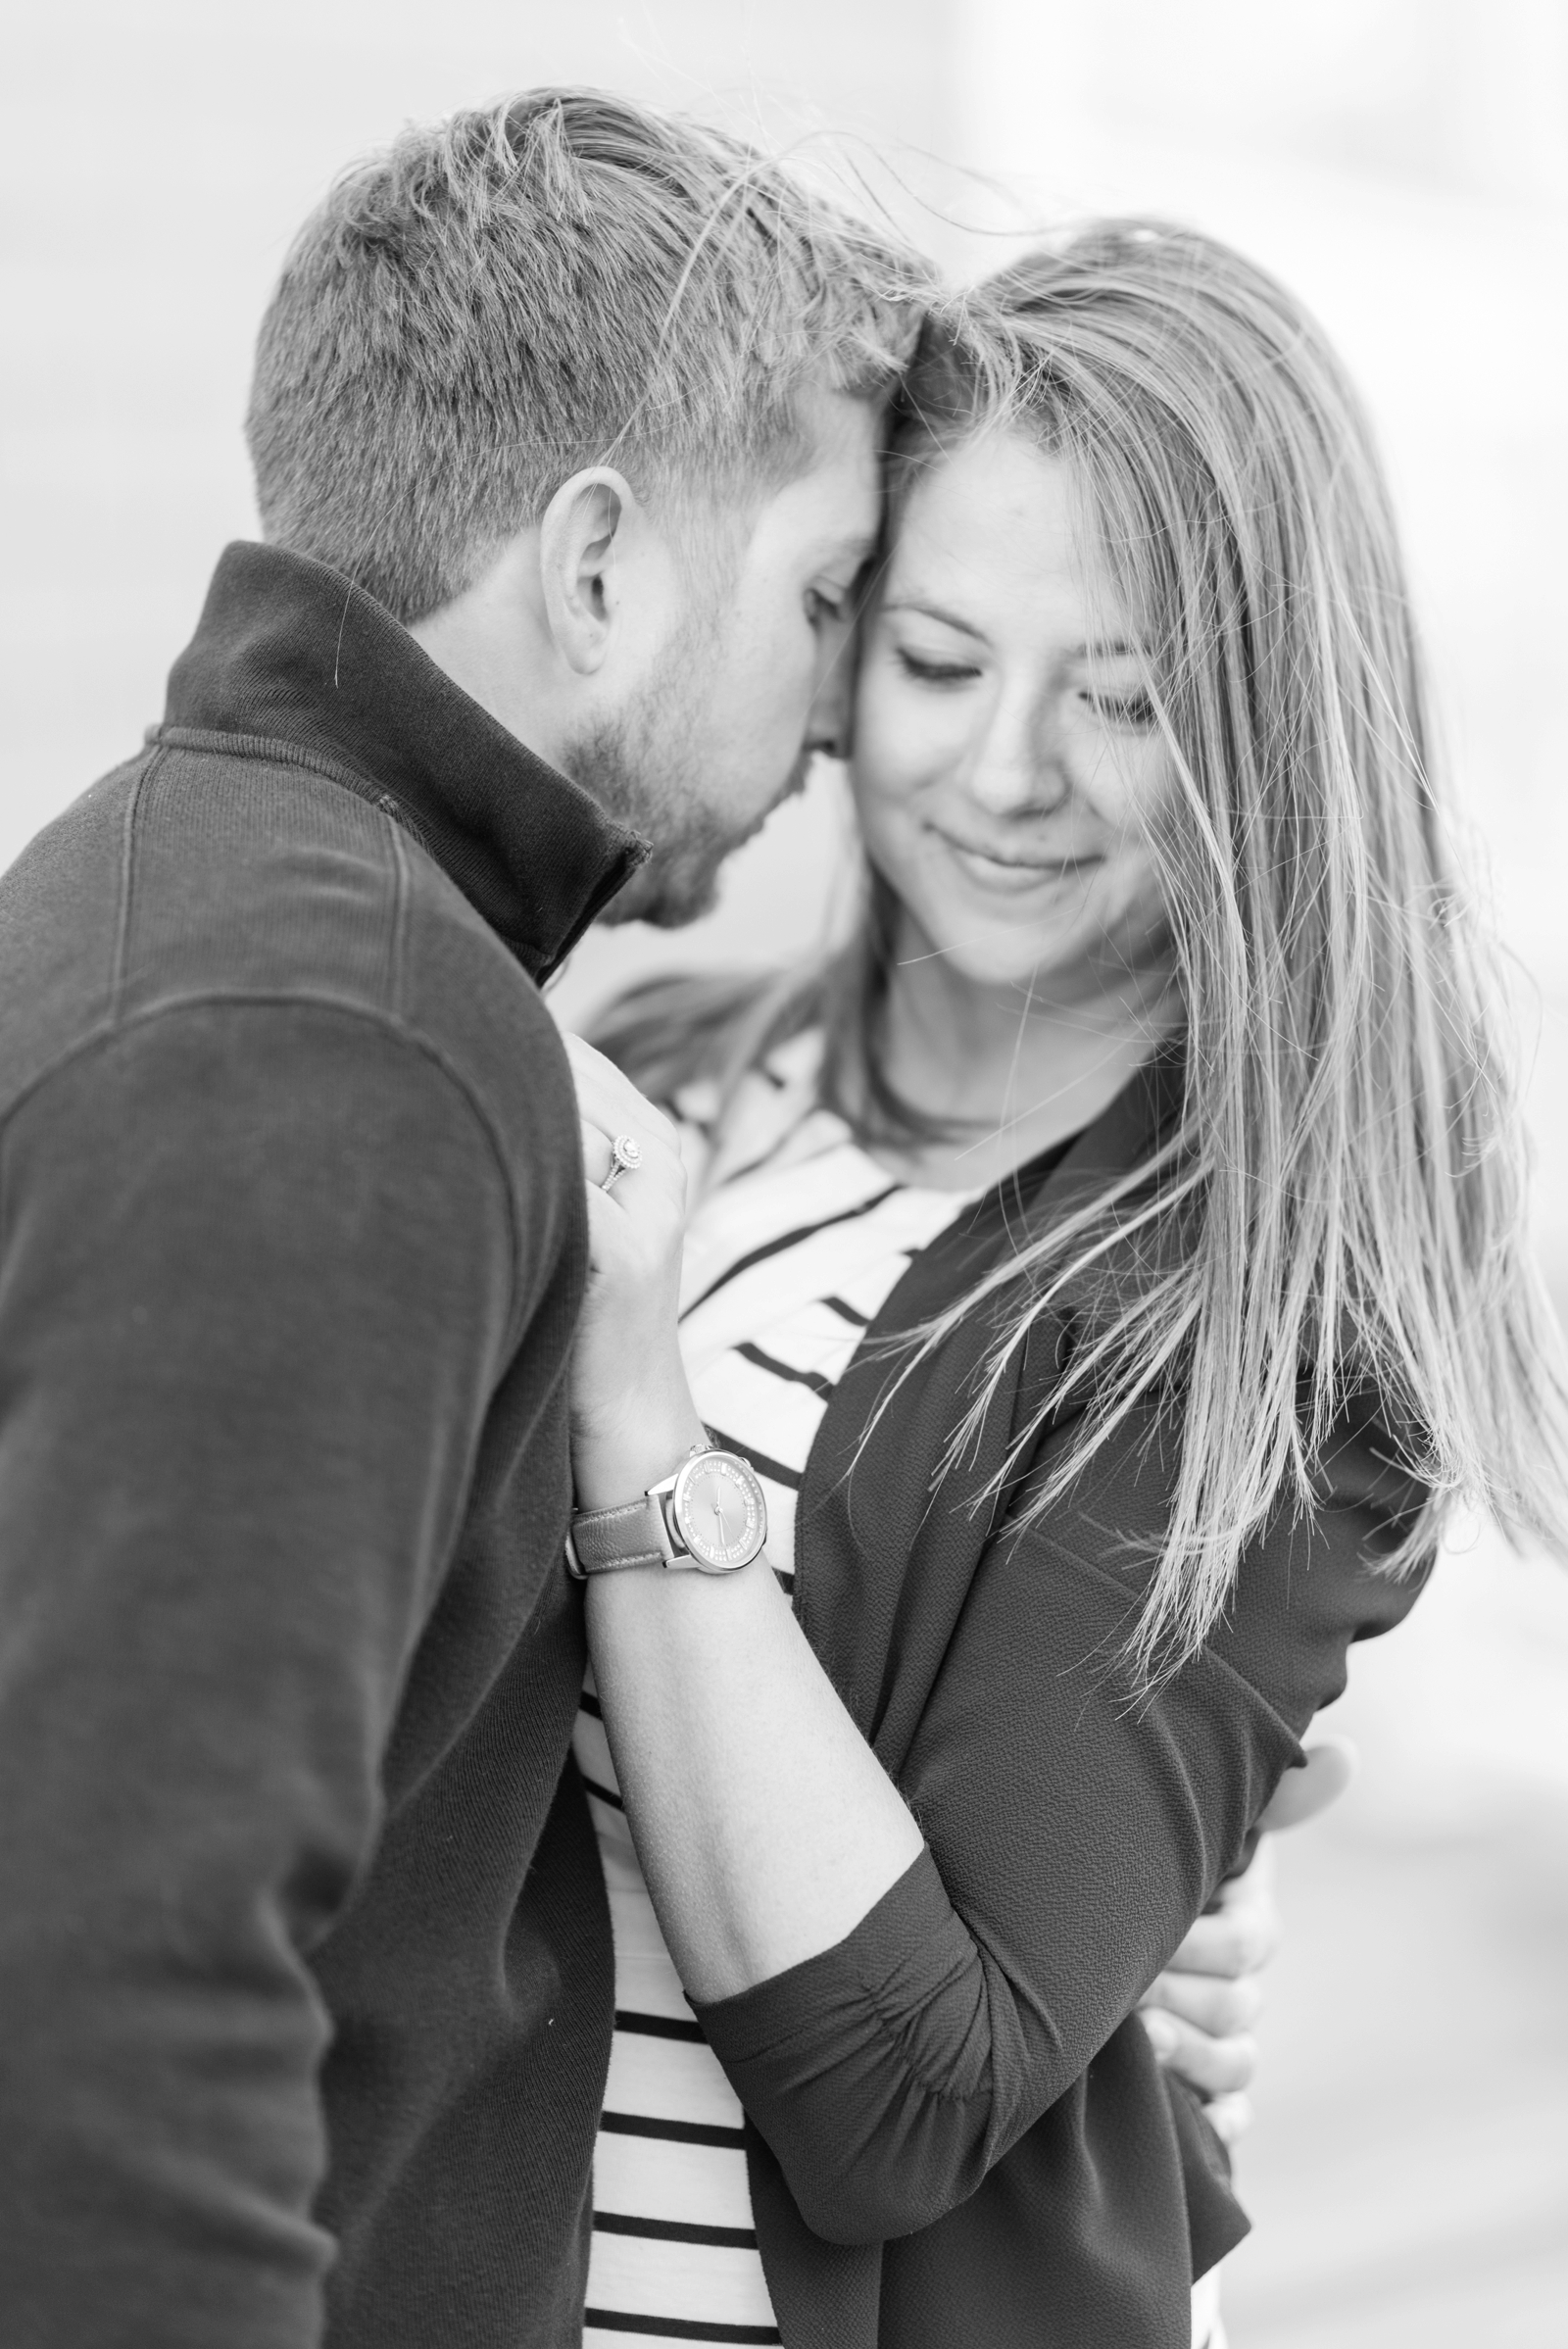 downtown-norfolk-winter-engagement-session-photo_7255.jpg